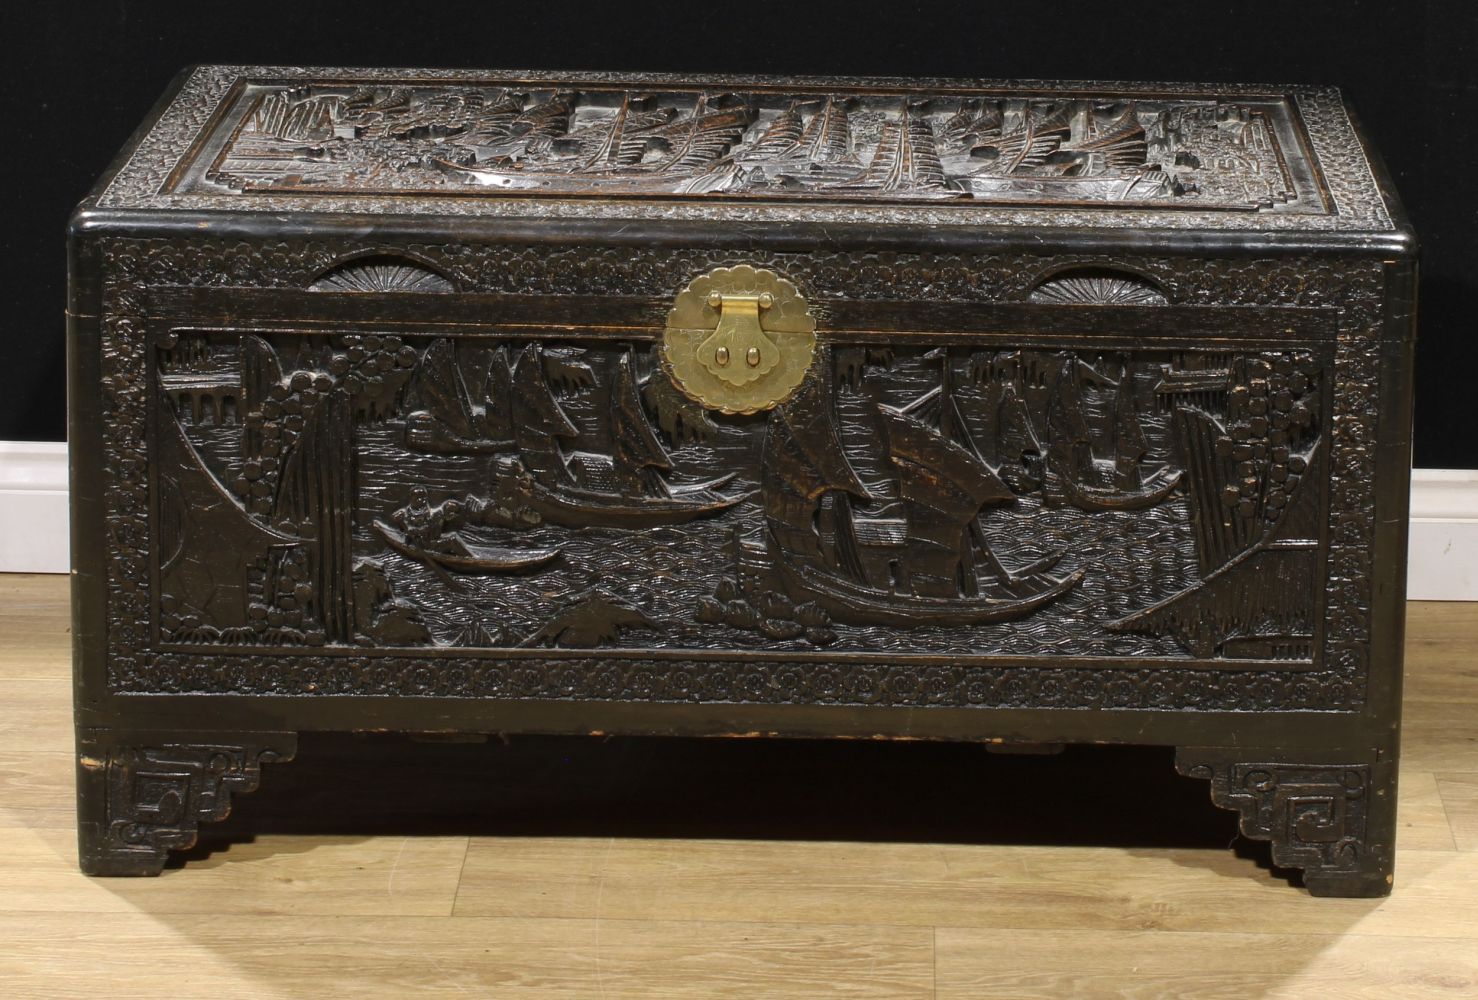 A South-East Asian camphor-lined chest, with insert lattice tray, 52cm high, 101cm wide, 56cm deep